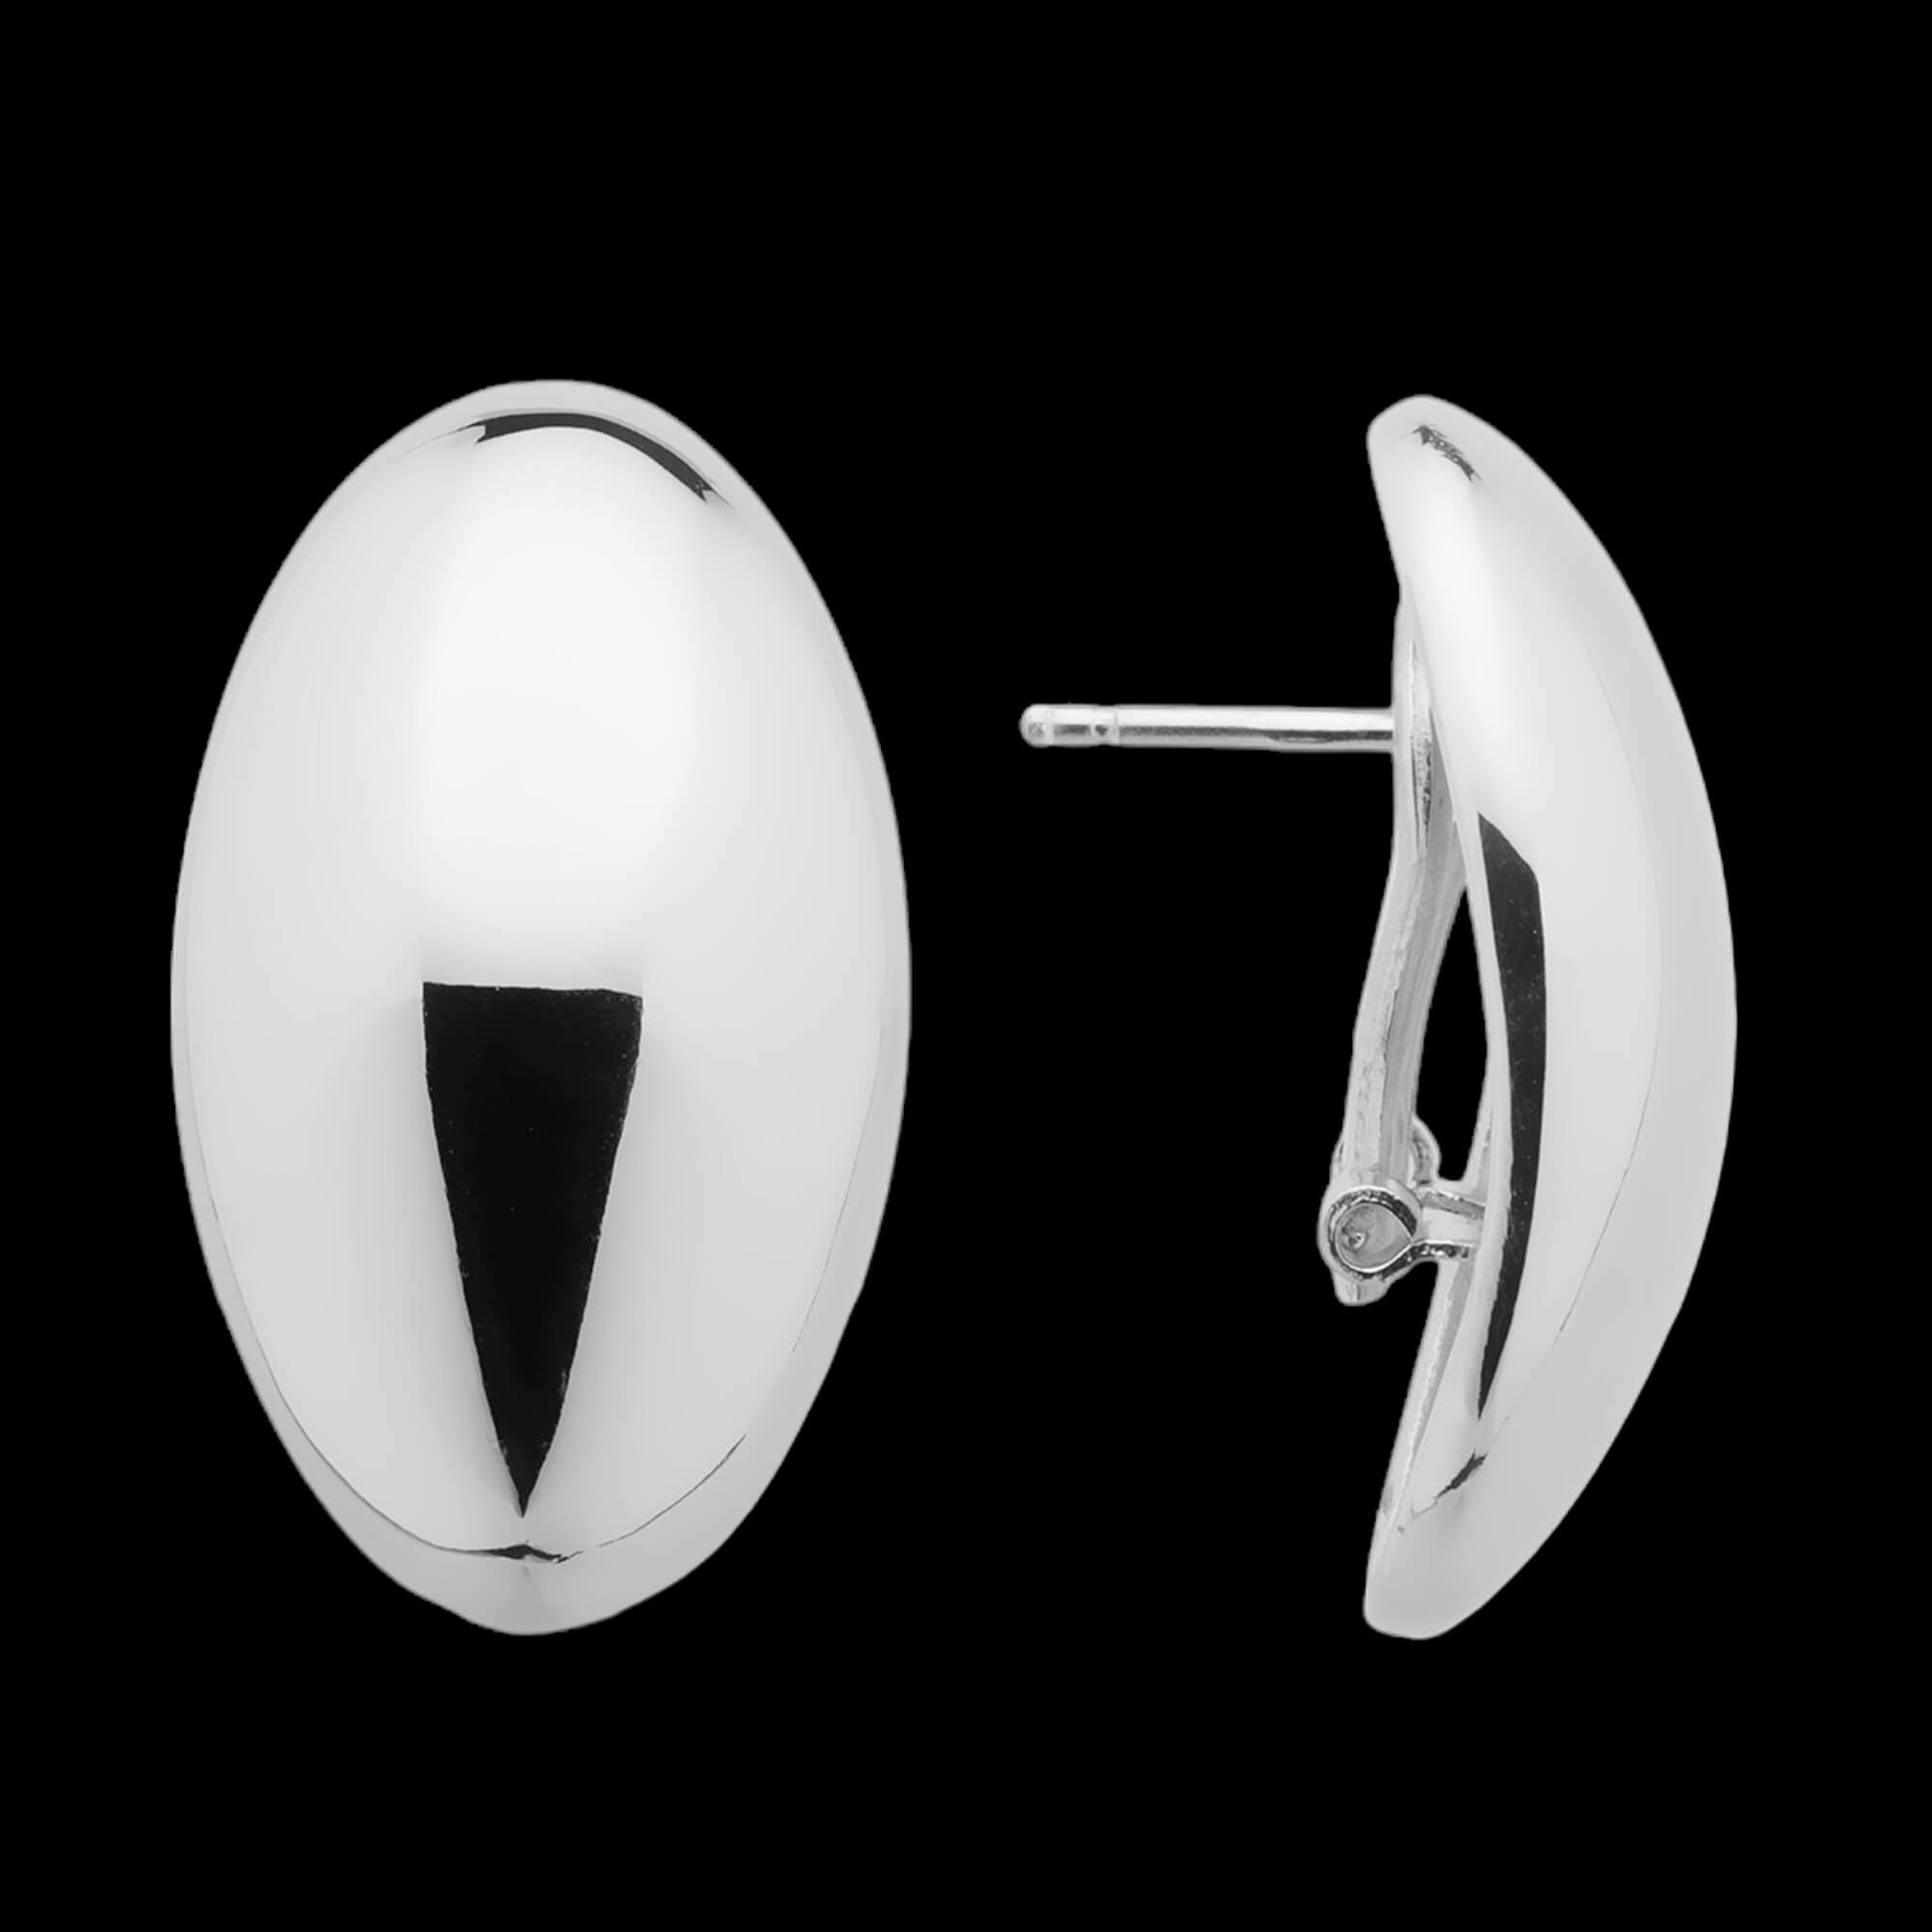 Tight silver polished oval earrings